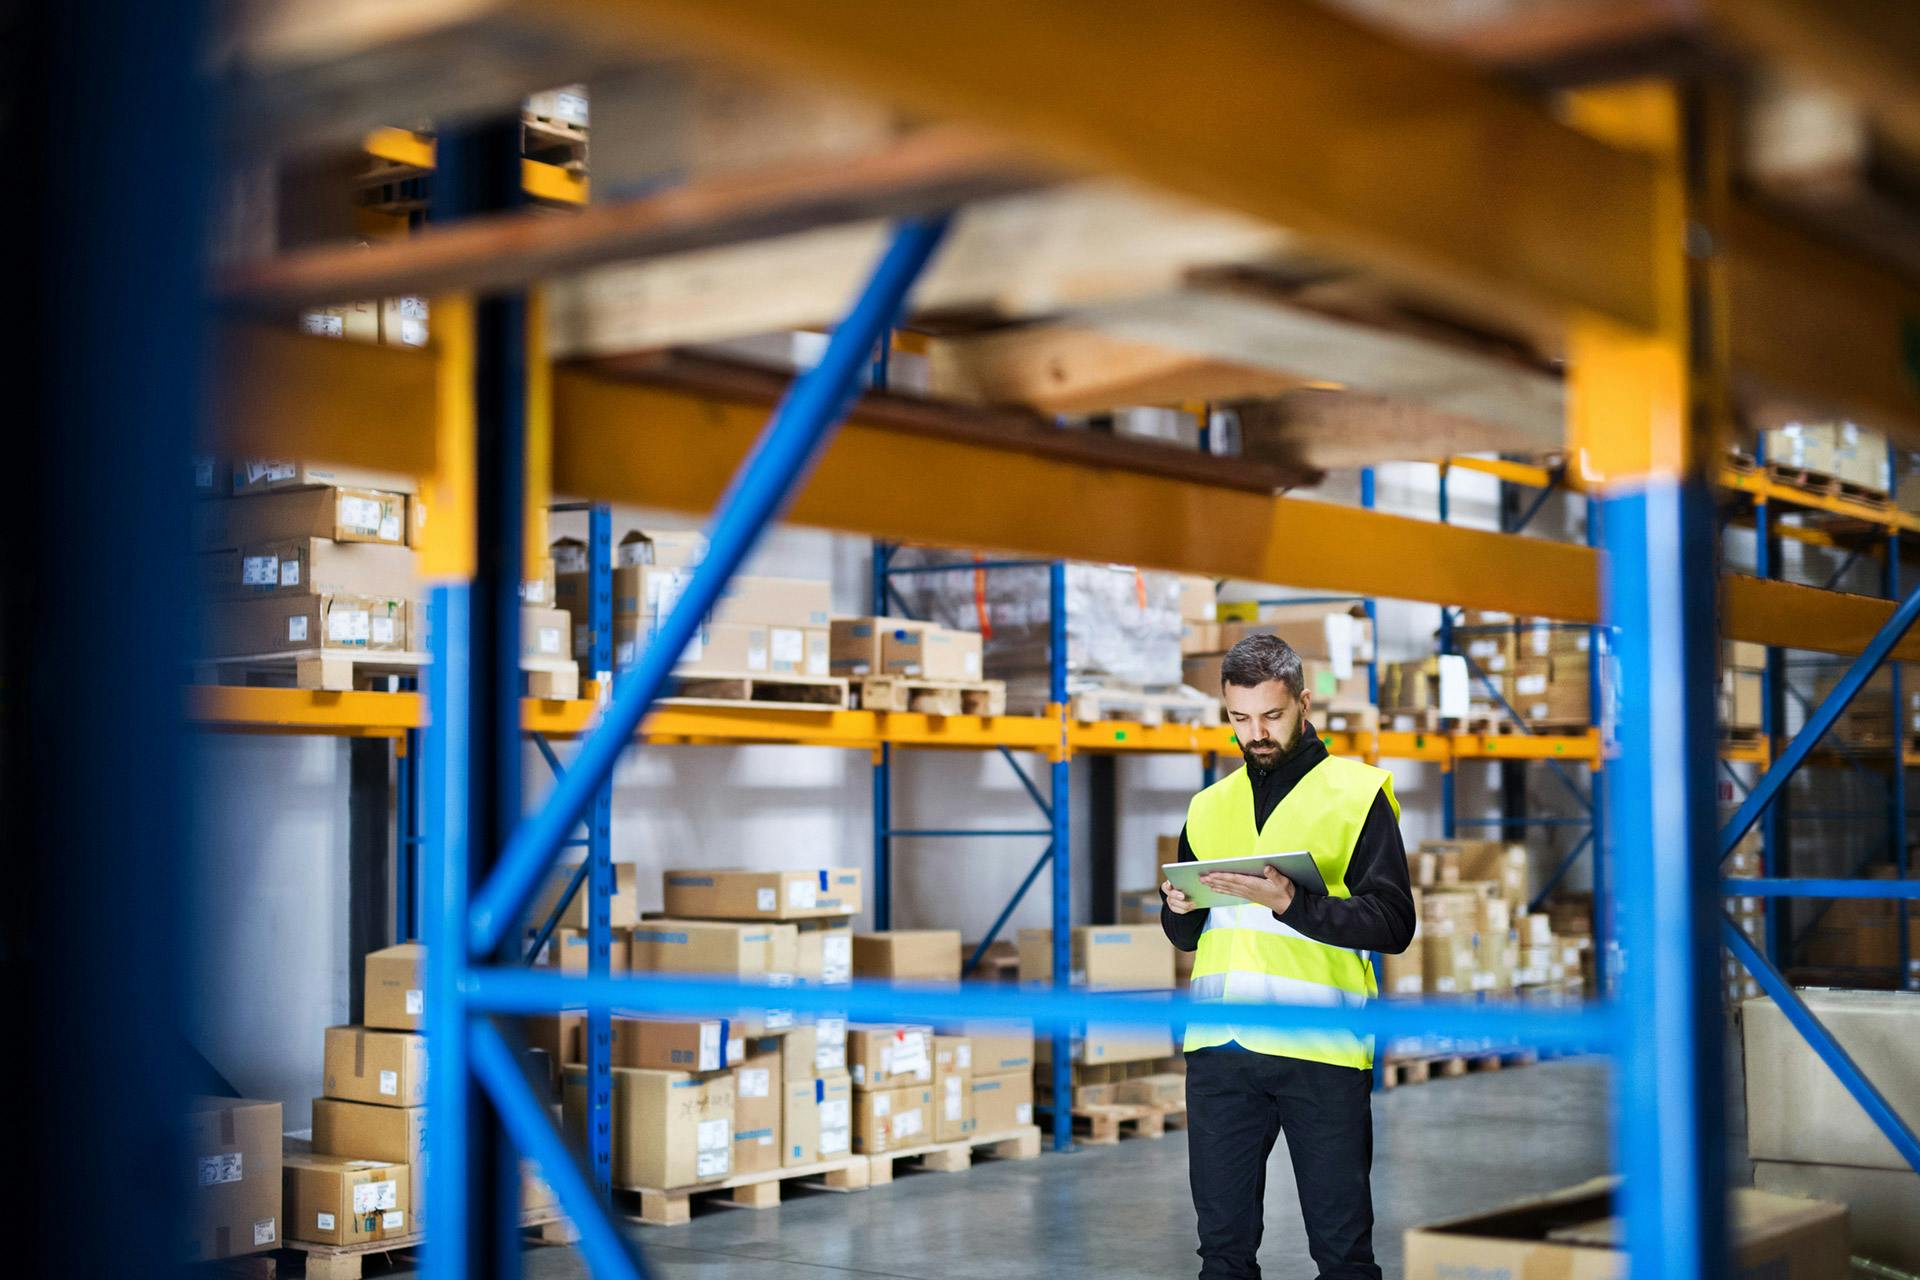 Warehouse employees: Fast processes through automation and digitalization of incoming goods.